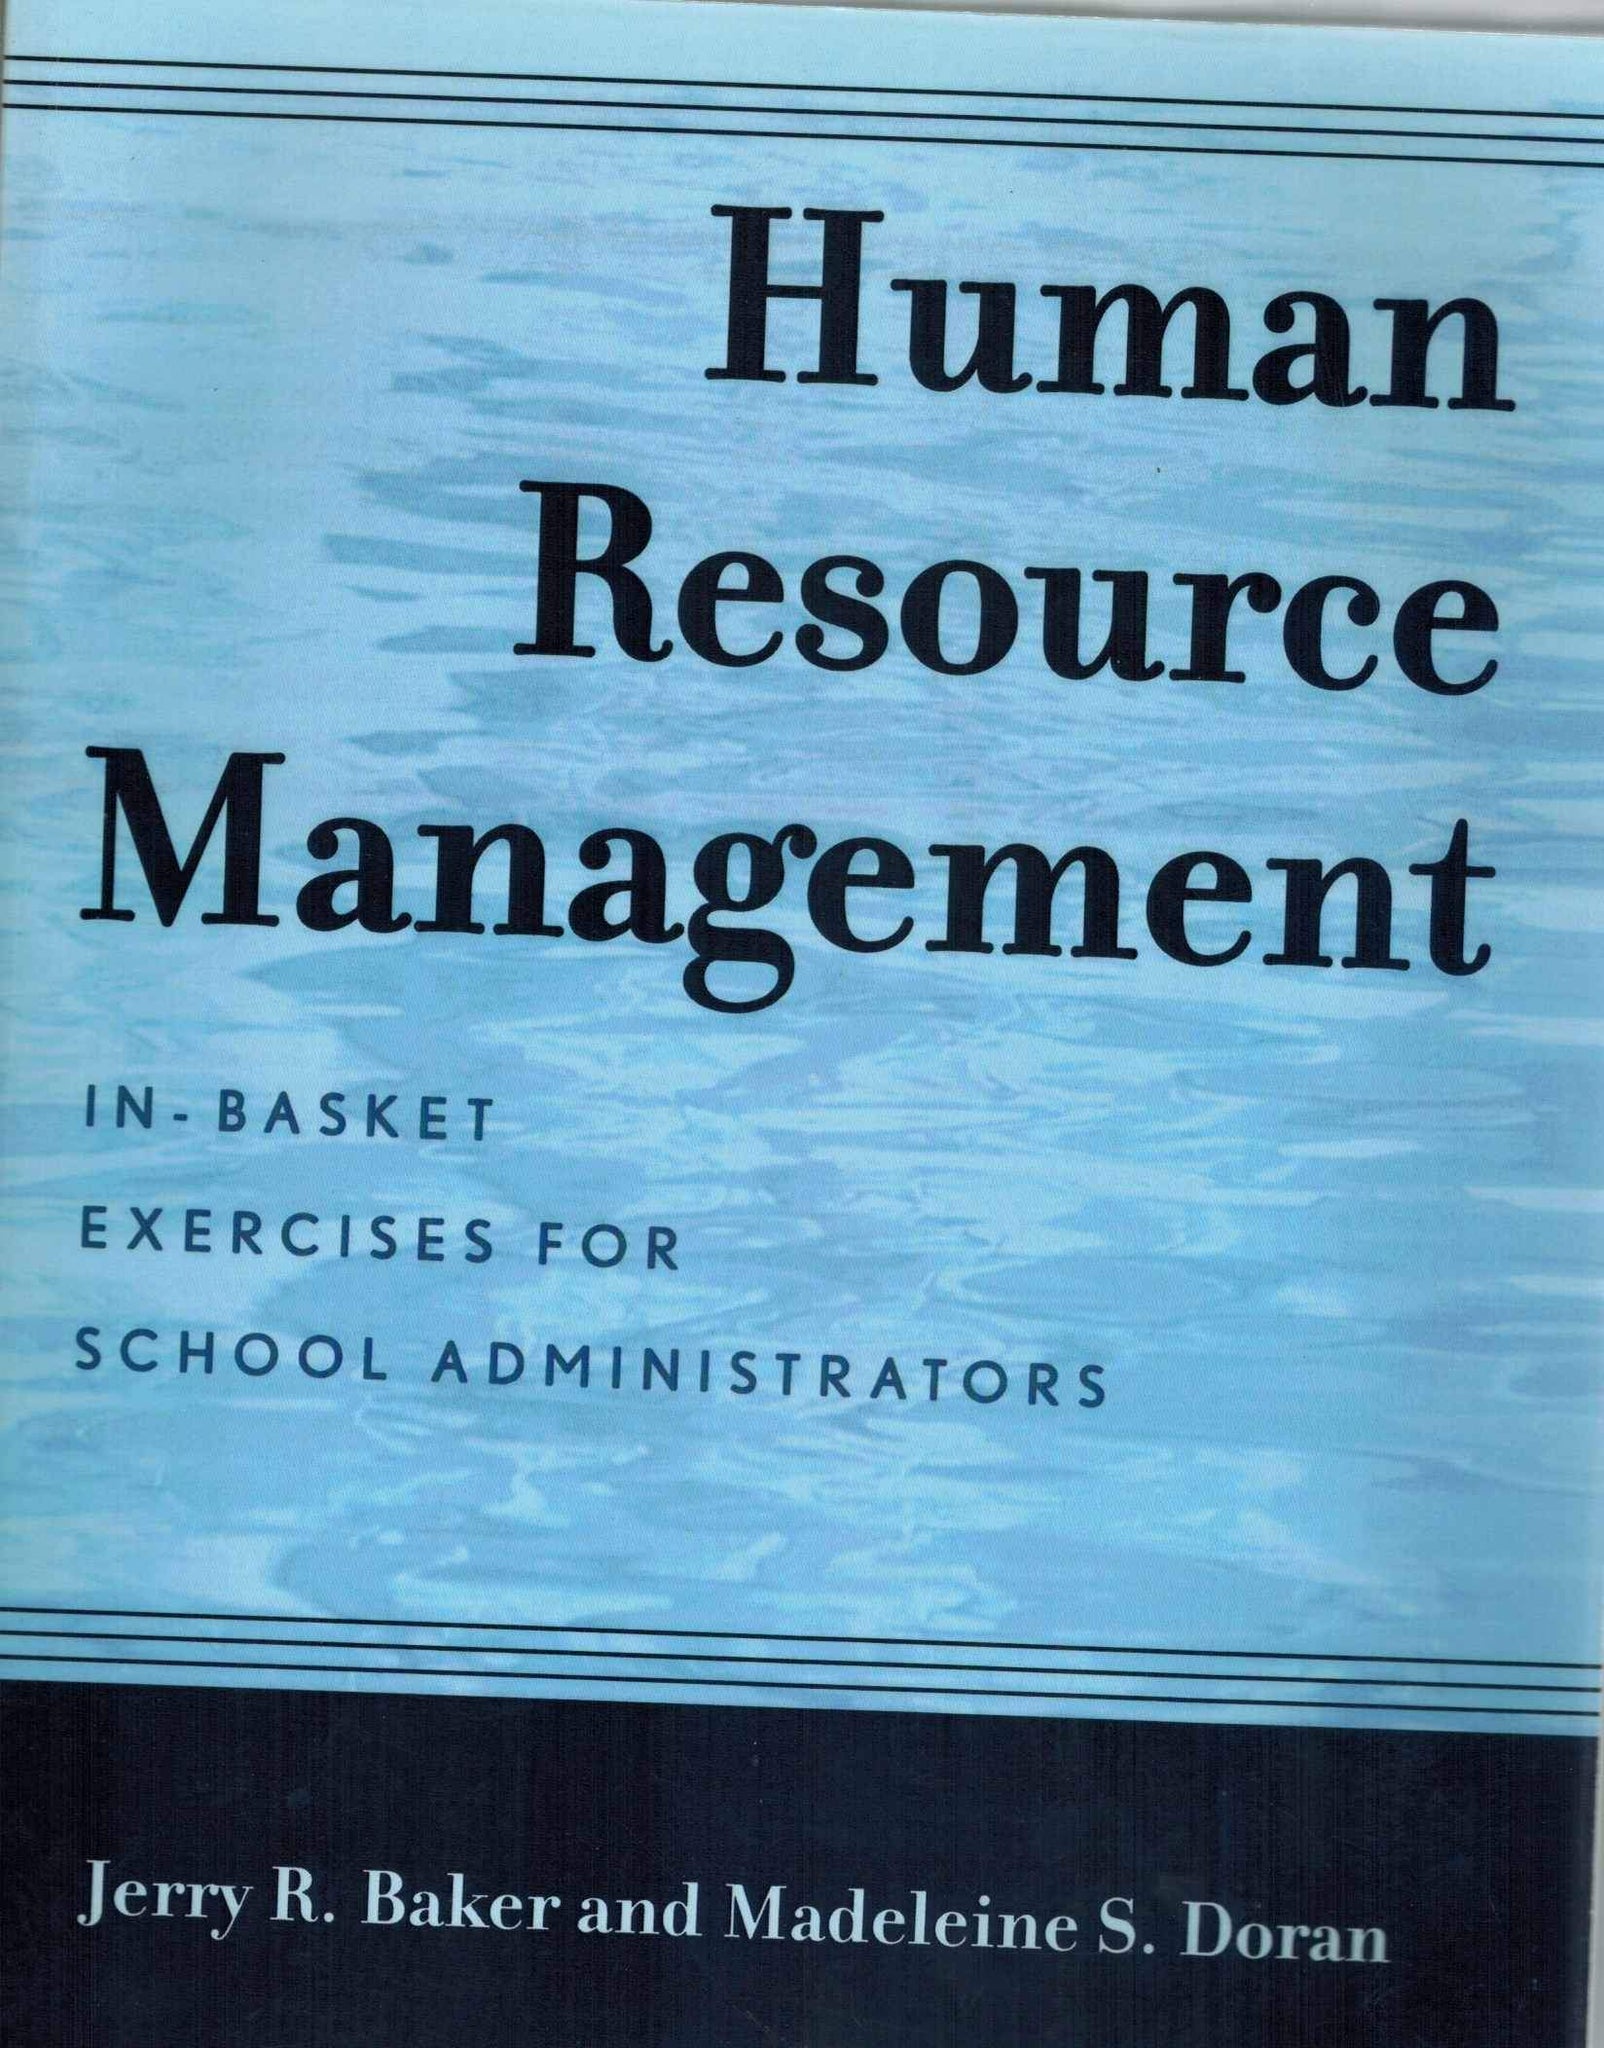 Human Resource Management  In-Basket Exercises for School Administrators - books-new